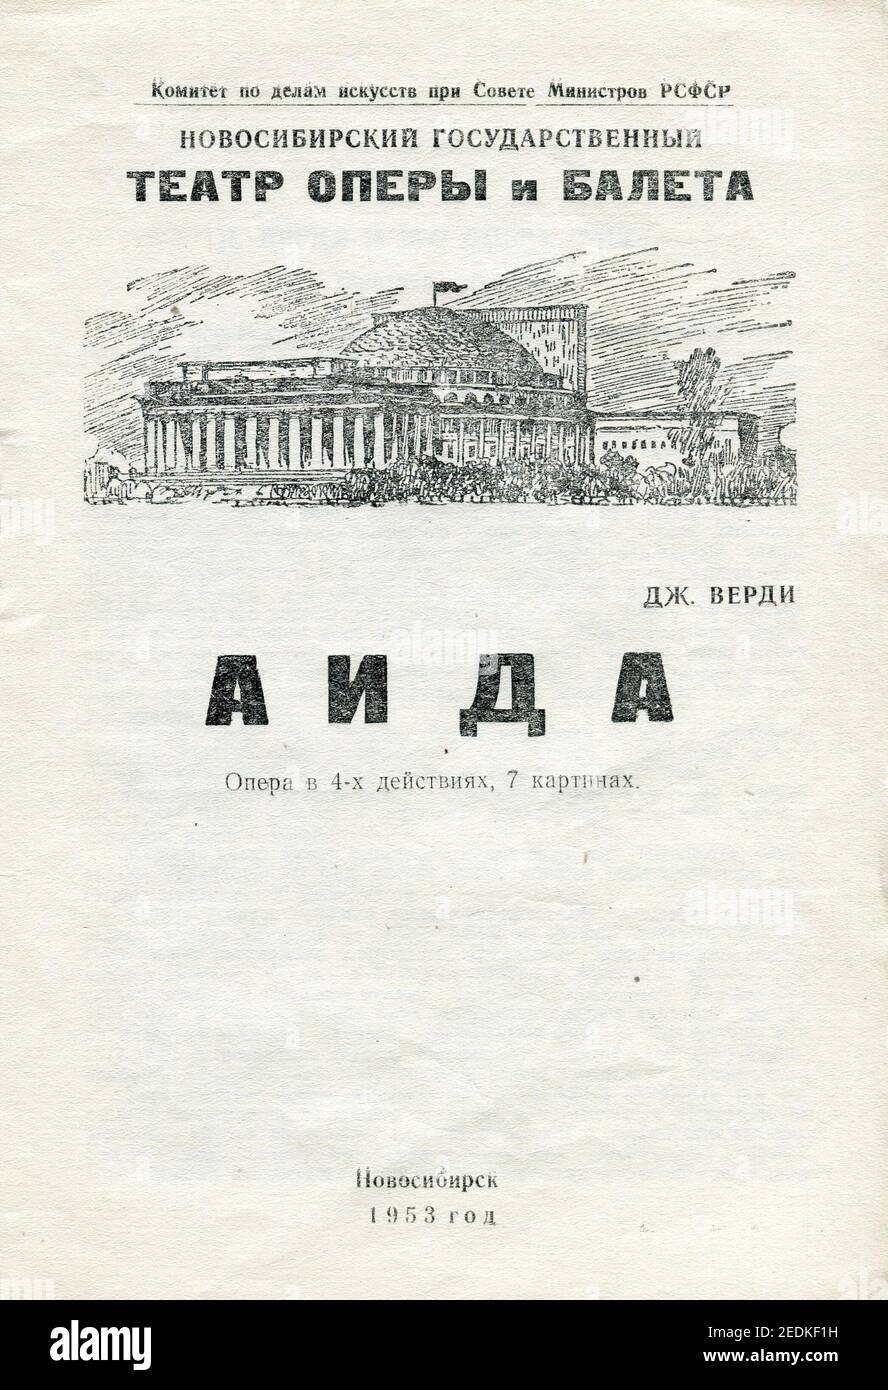 The Concert program for 1953 Novosibirsk Opera and Ballet Theater, first published in 1953 in USSR. Stock Photo